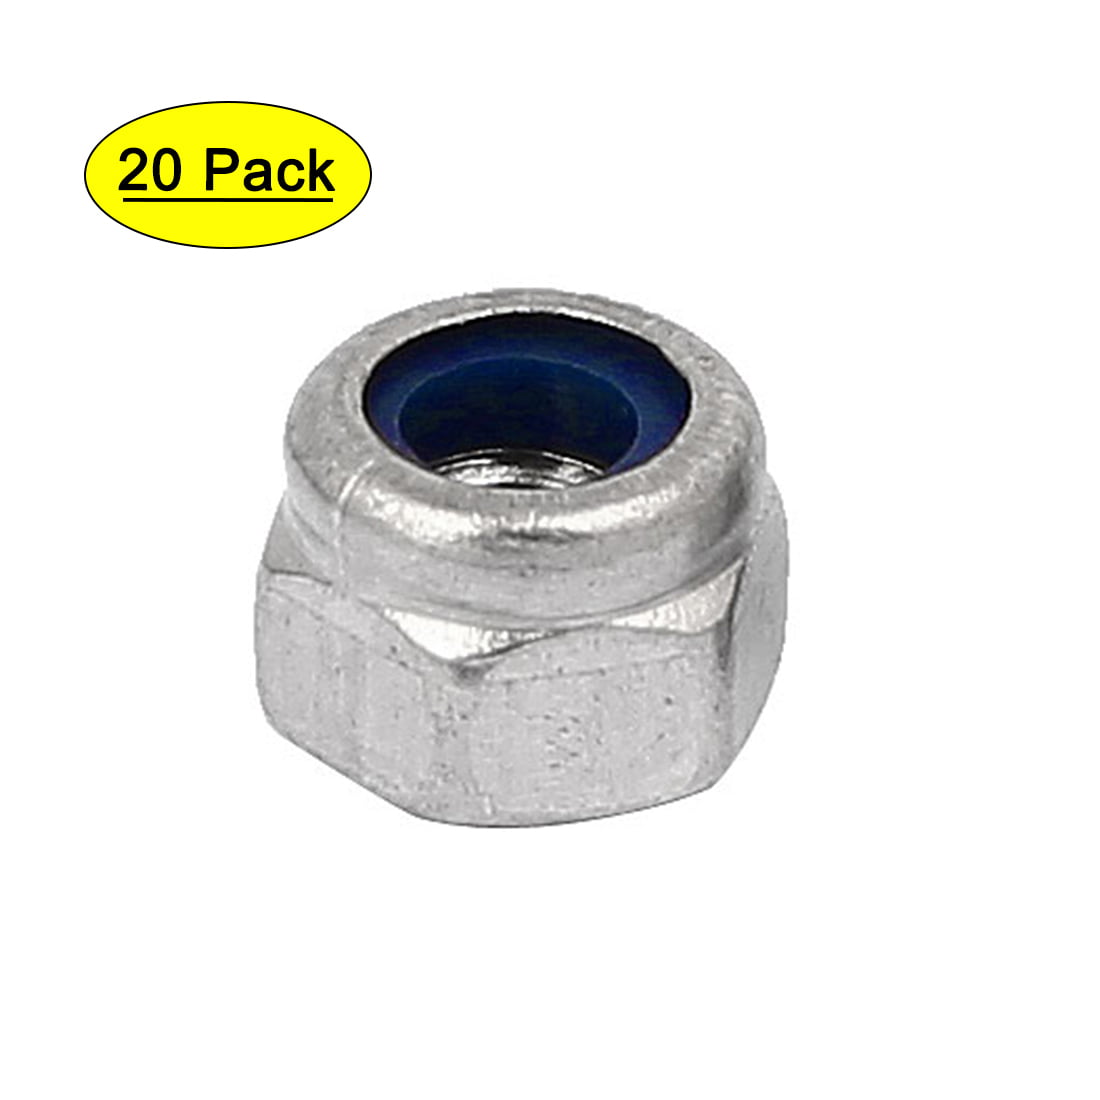 uxcell M5 x 0.8mm Nylon Insert Hex Lock Nuts Pack of 20 316 Stainless Steel Plain Finish 